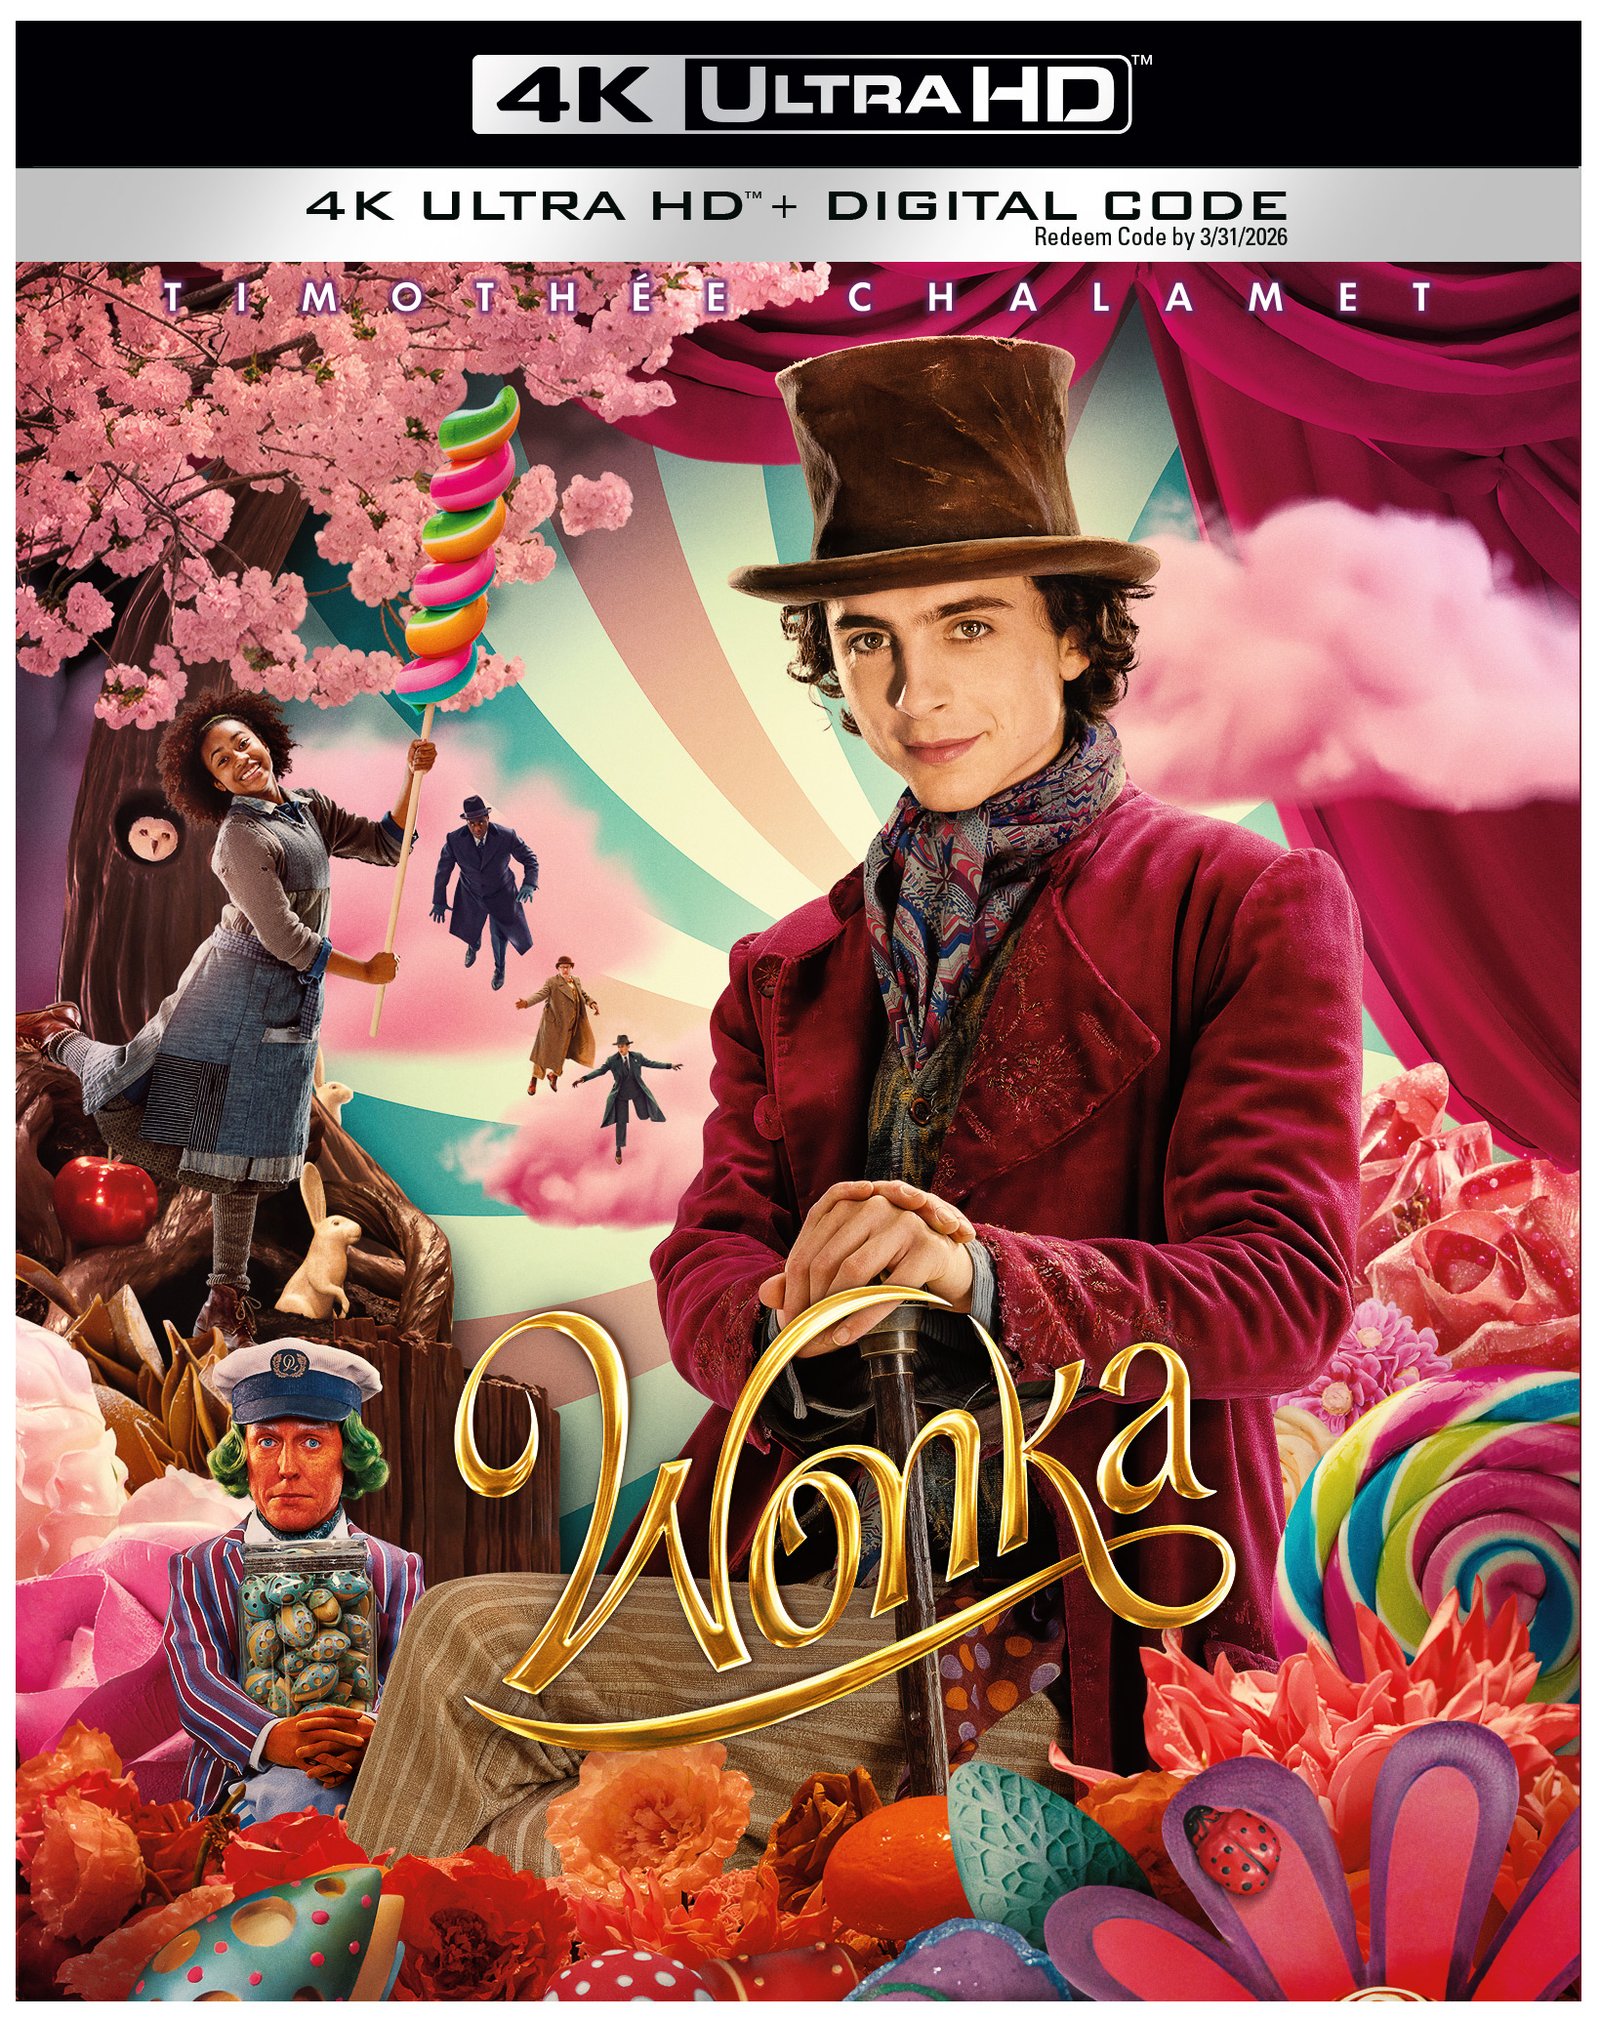 'Wonka' Starring Timothée Chalamet on 4K, Bluray and DVD in February